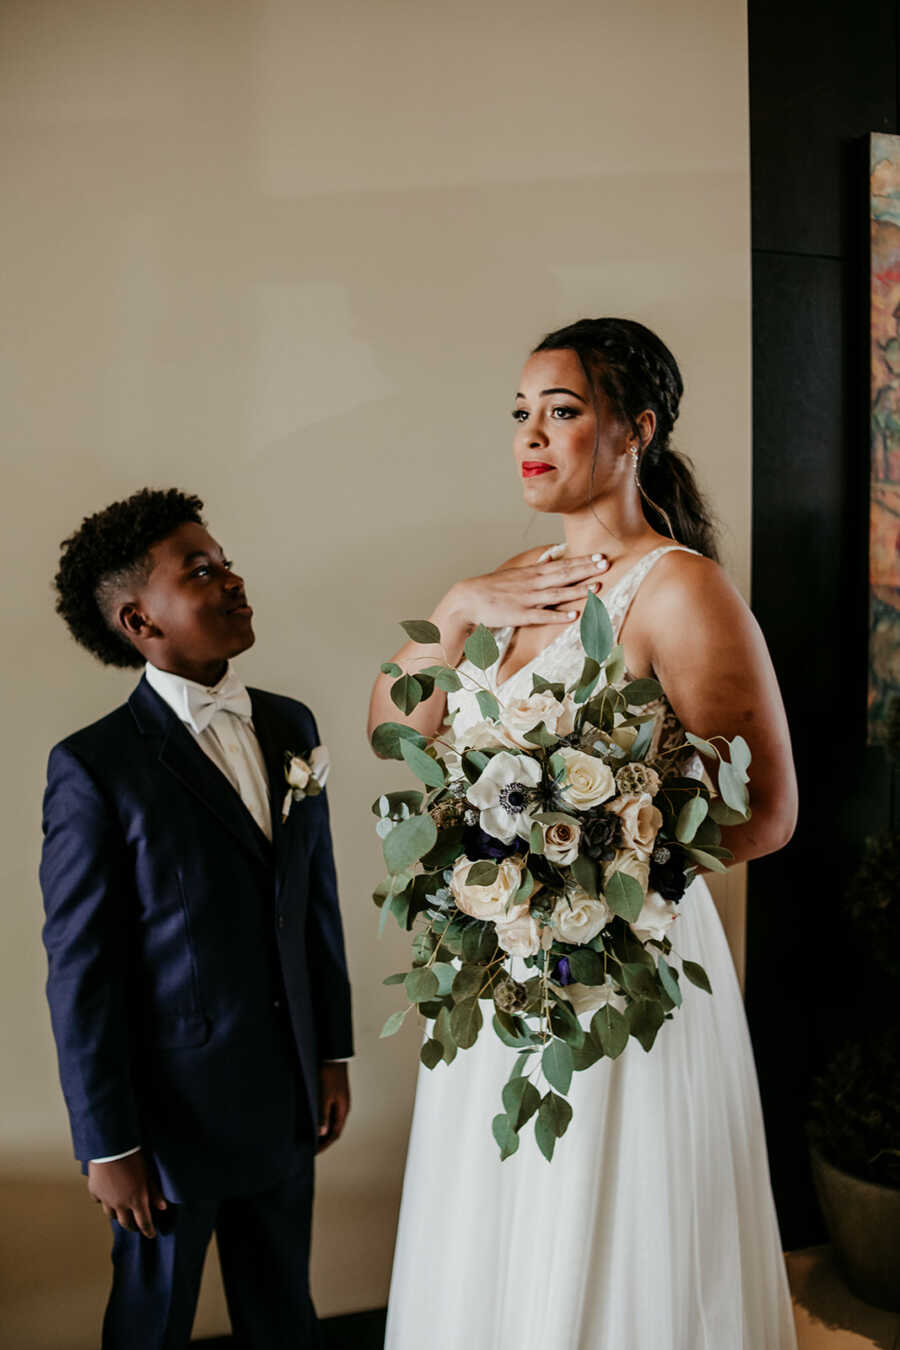 Mom does a first look with her son on her wedding day